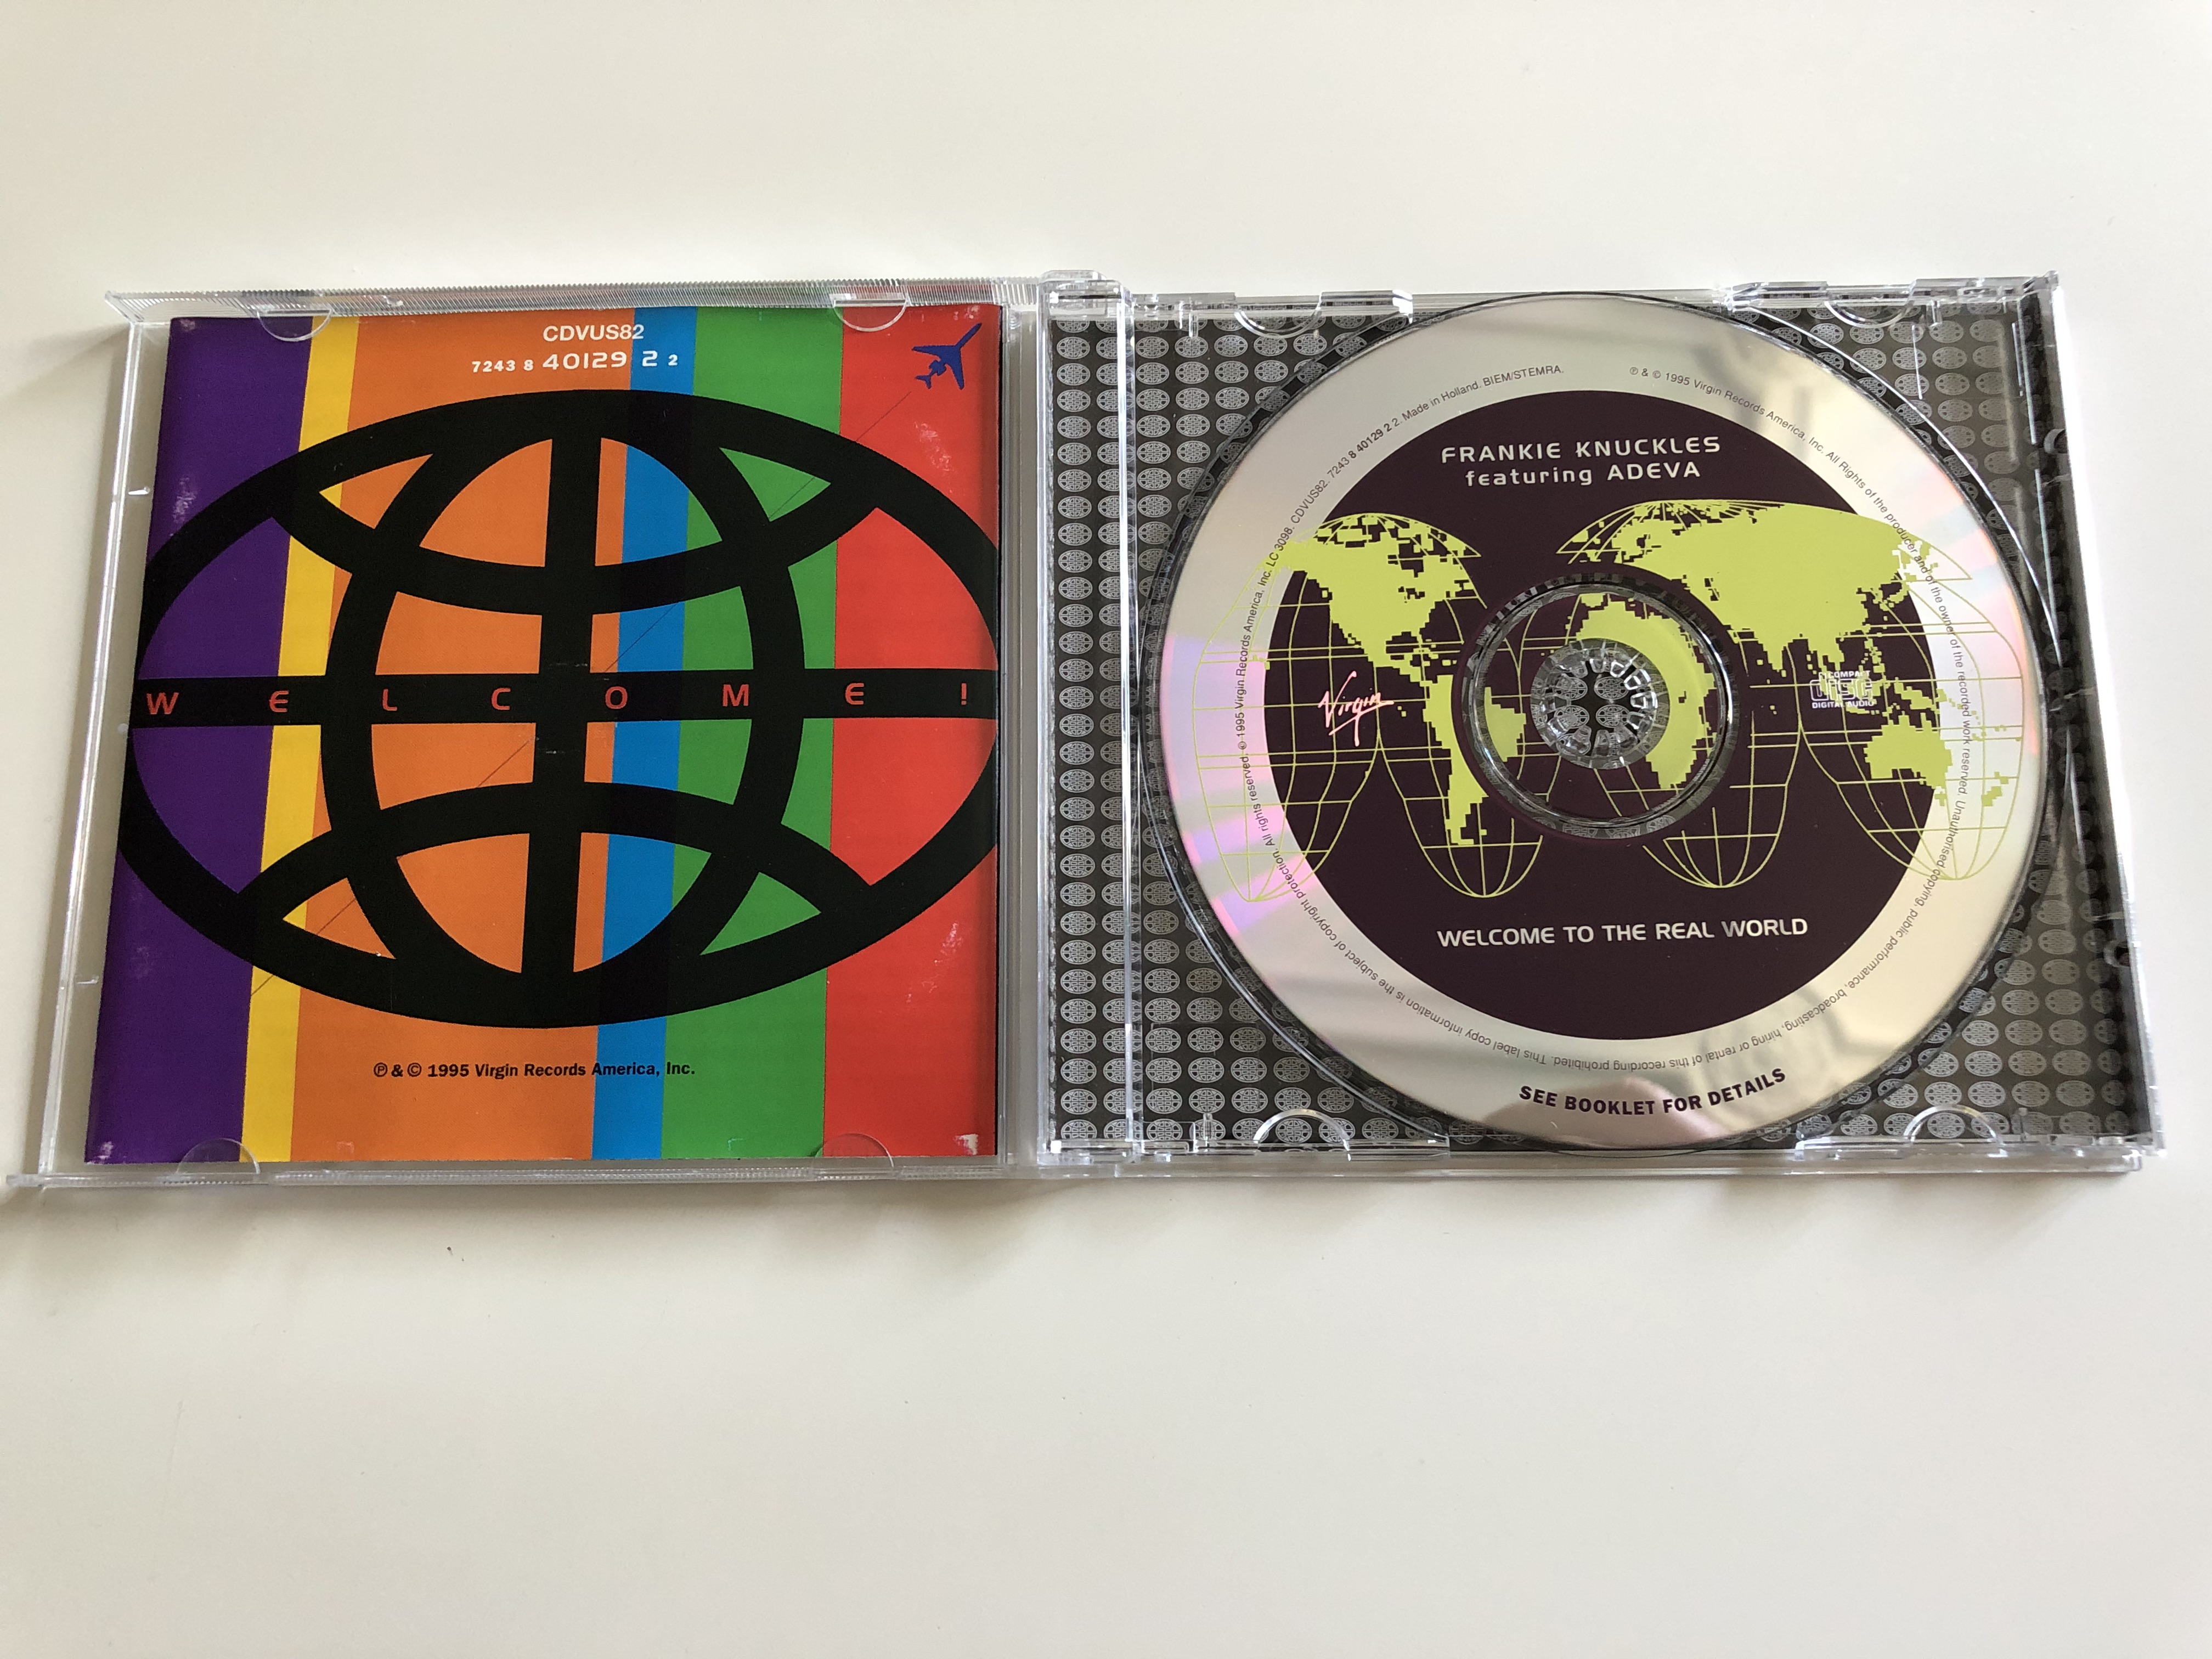 frankie-knuckles-featuring-adeva-welcome-to-the-real-world-audio-cd-1995-virgin-5-.jpg